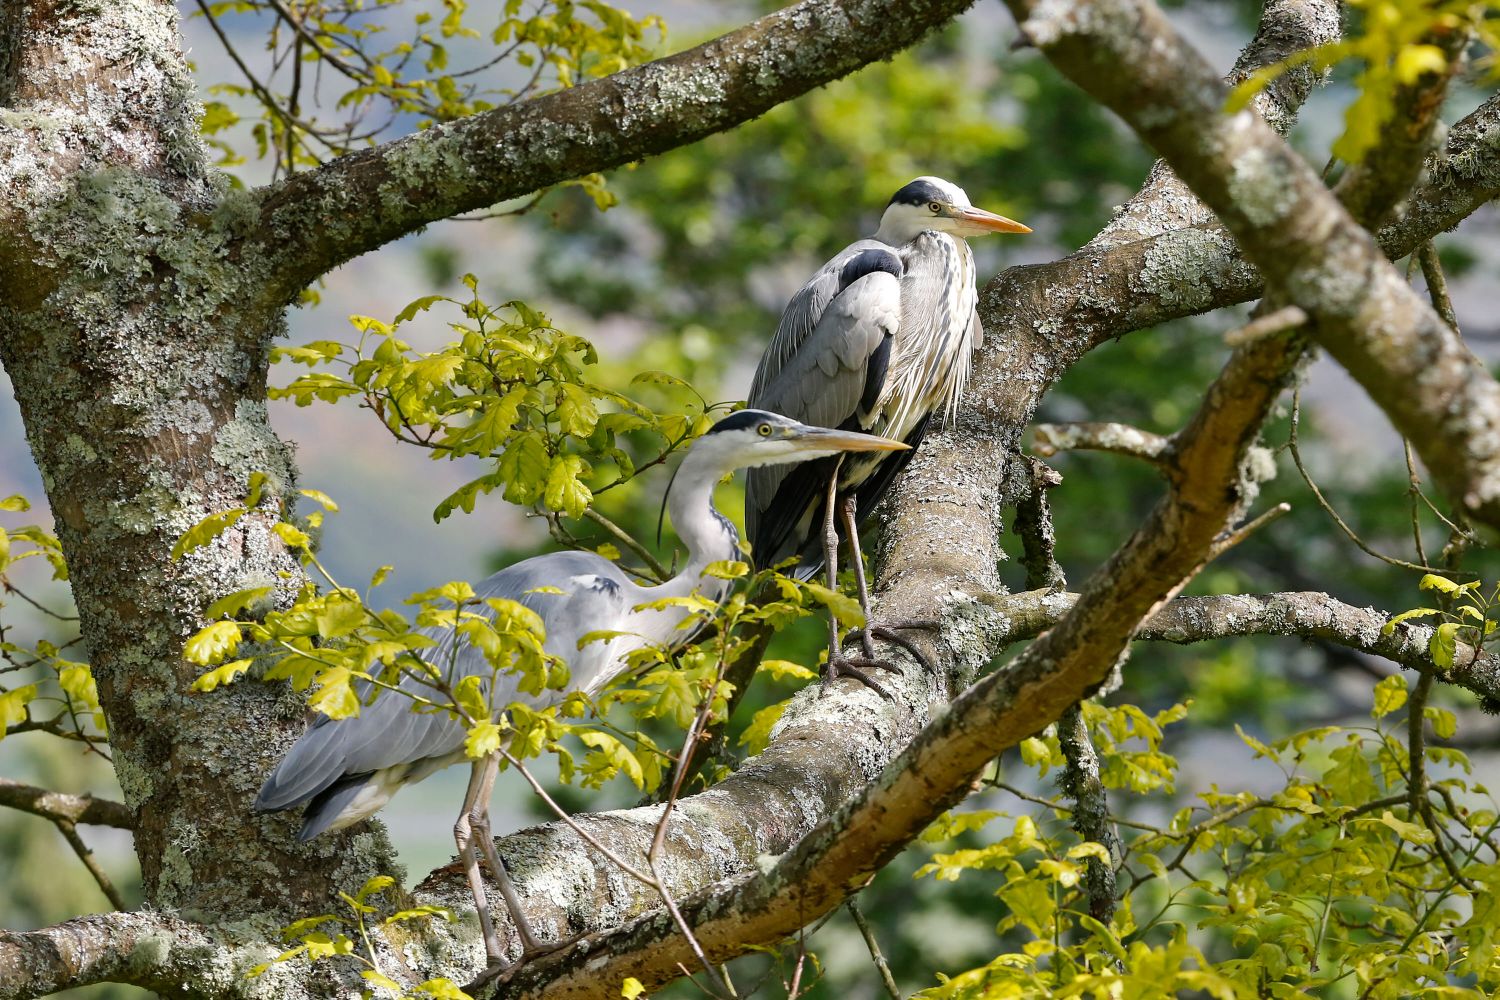 Two Grey Herons sunning themselves in an oak tree